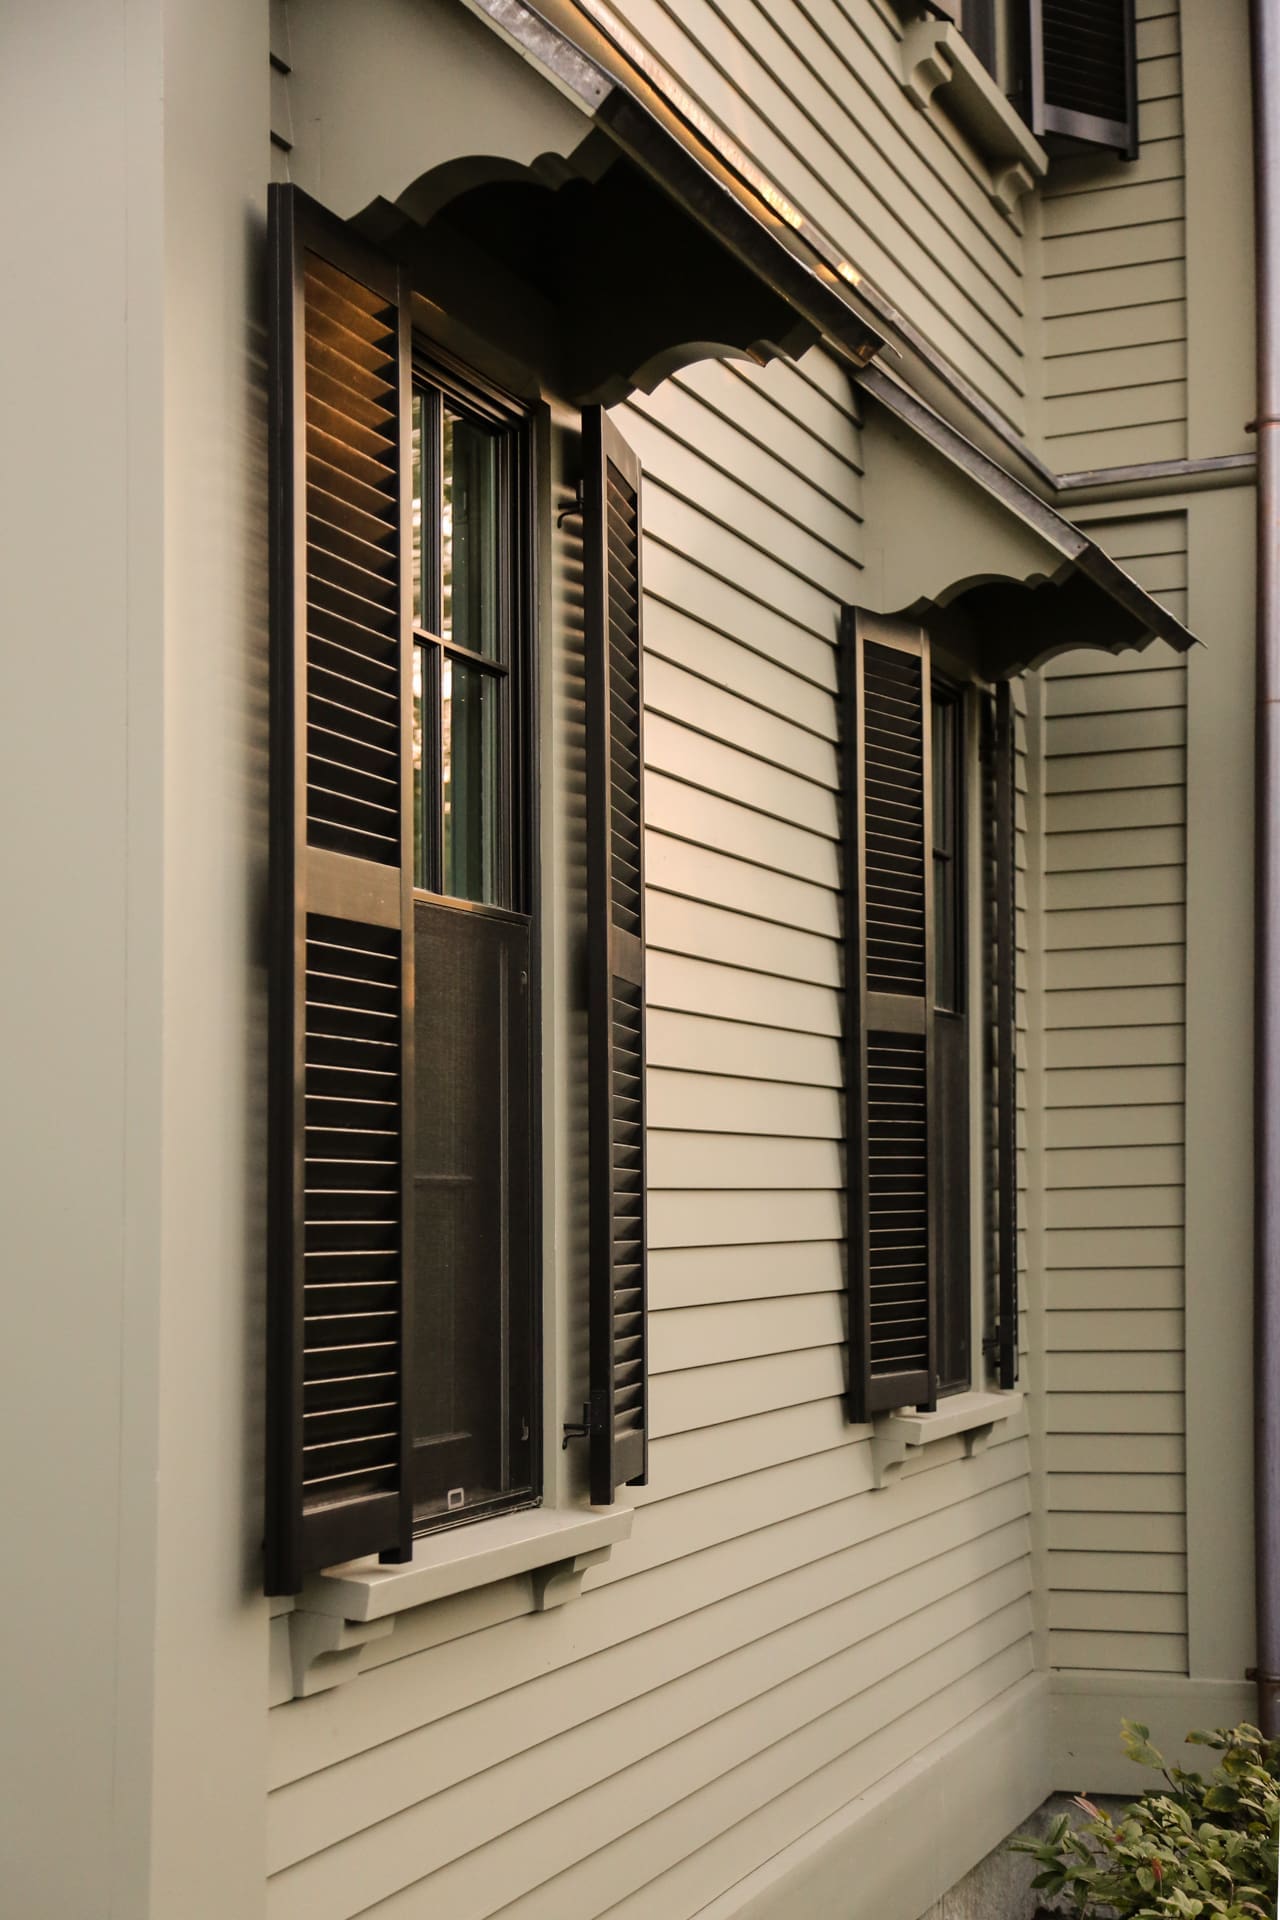 A photo of a house with grey-green siding and windows with black wooden shutters and an overhang.